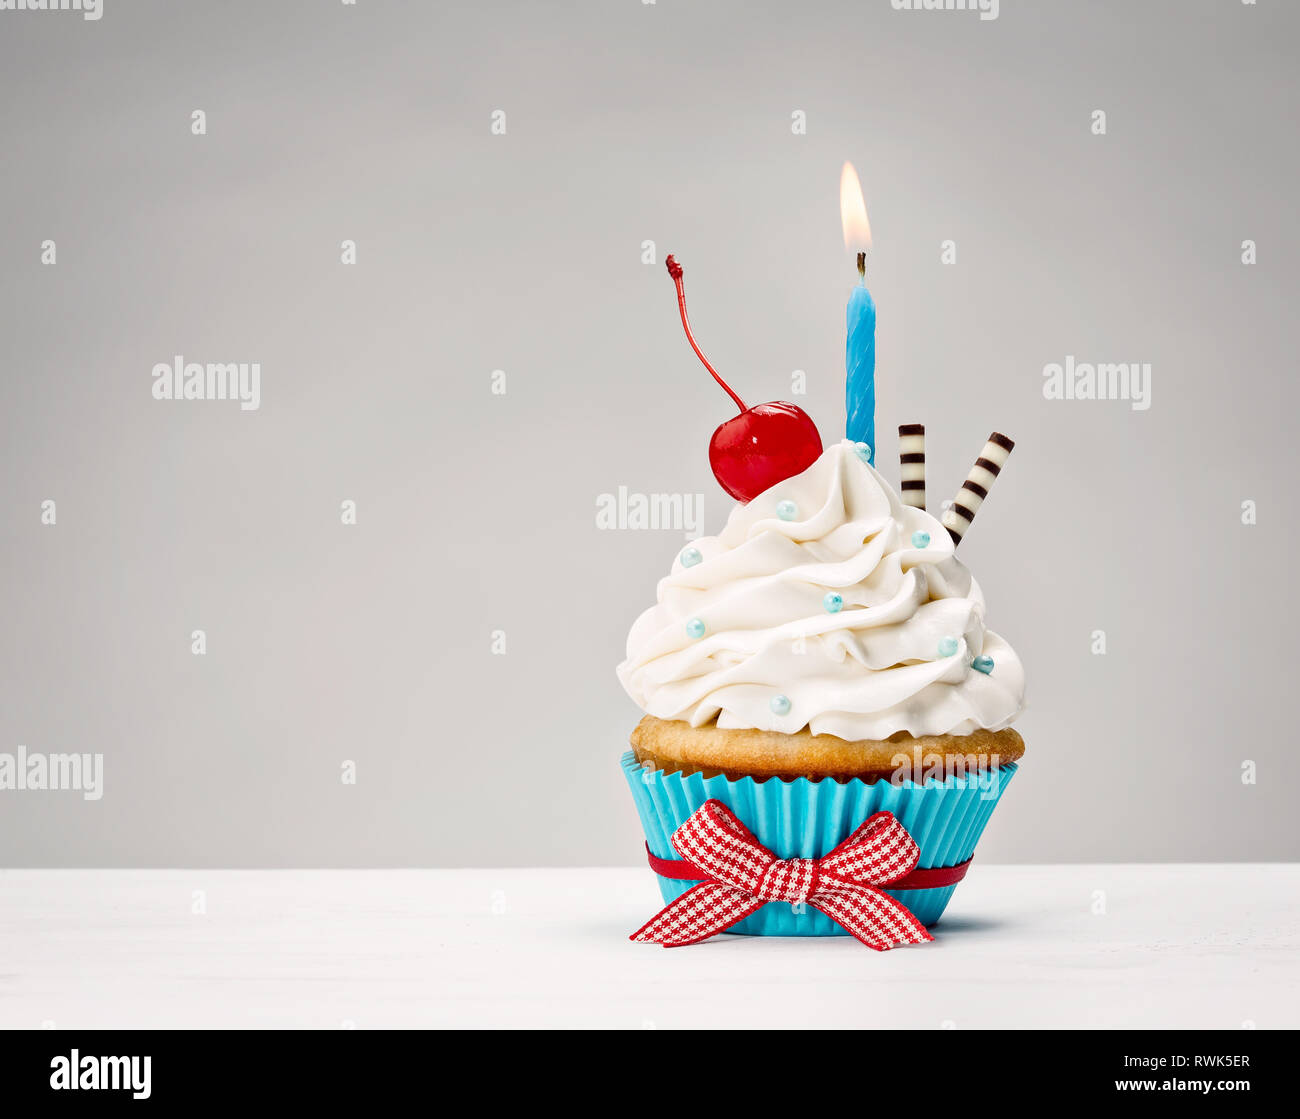 Cupcake with vanilla buttercream icing, birthday candle and a cherry on top. Stock Photo